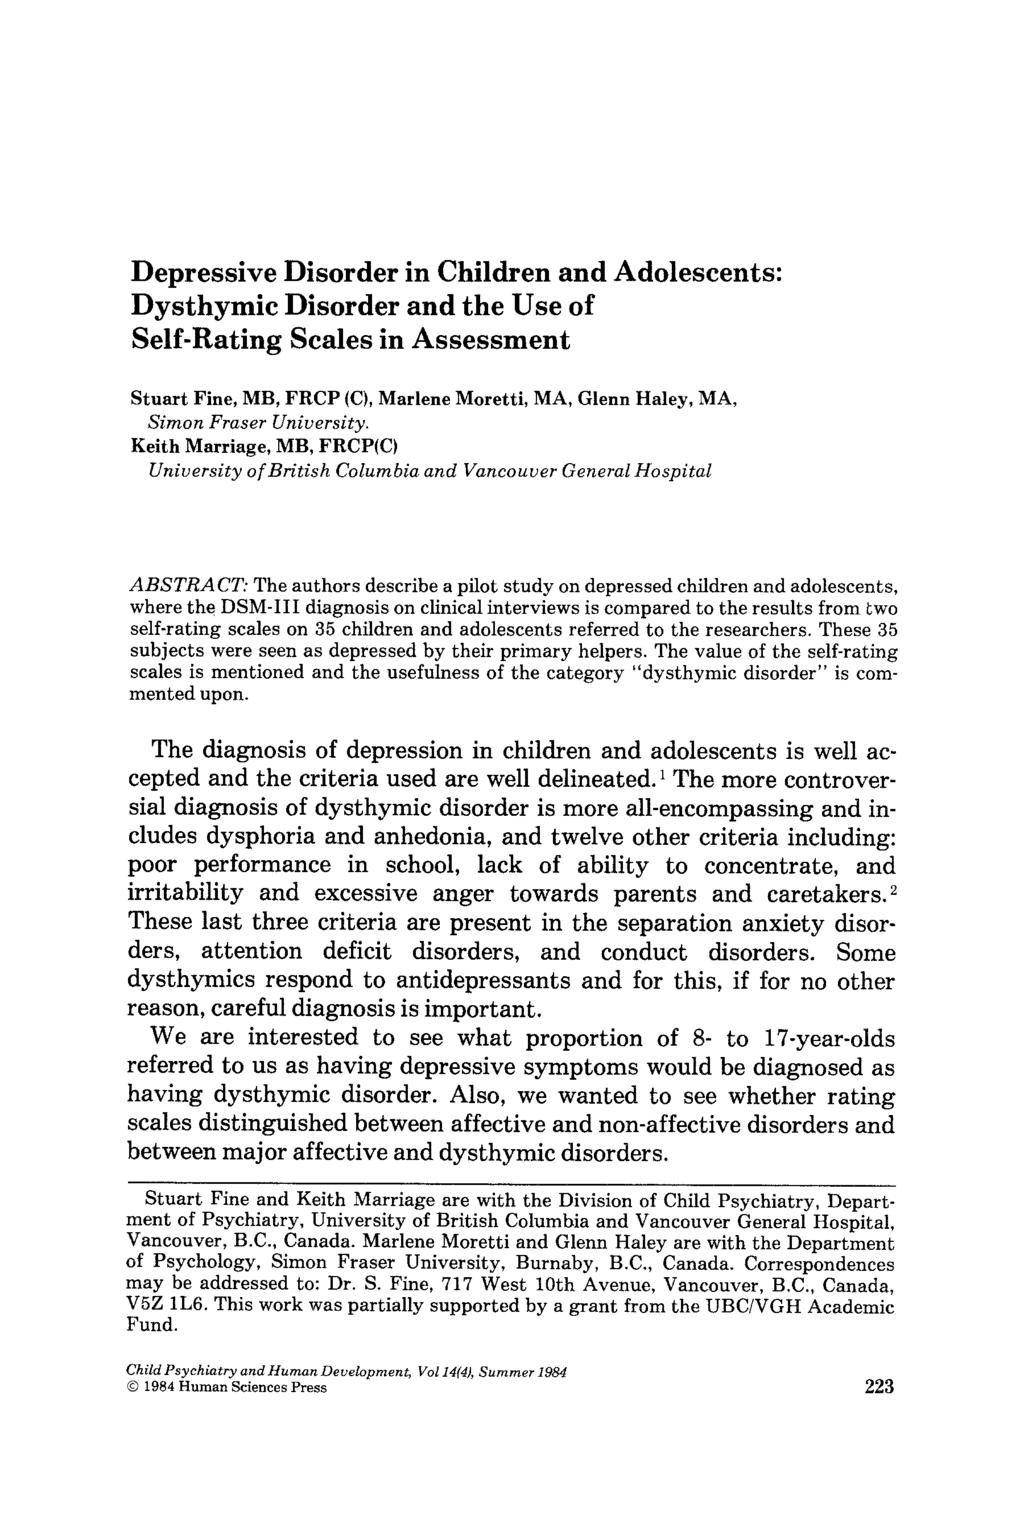 Depressive Disorder in Children and Adolescents: Dysthymic Disorder and the Use of Self-Rating Scales in Assessment Stuart Fine, MB, FRCP (C), Marlene Moretti, MA, Glenn Haley, MA, Simon Fraser